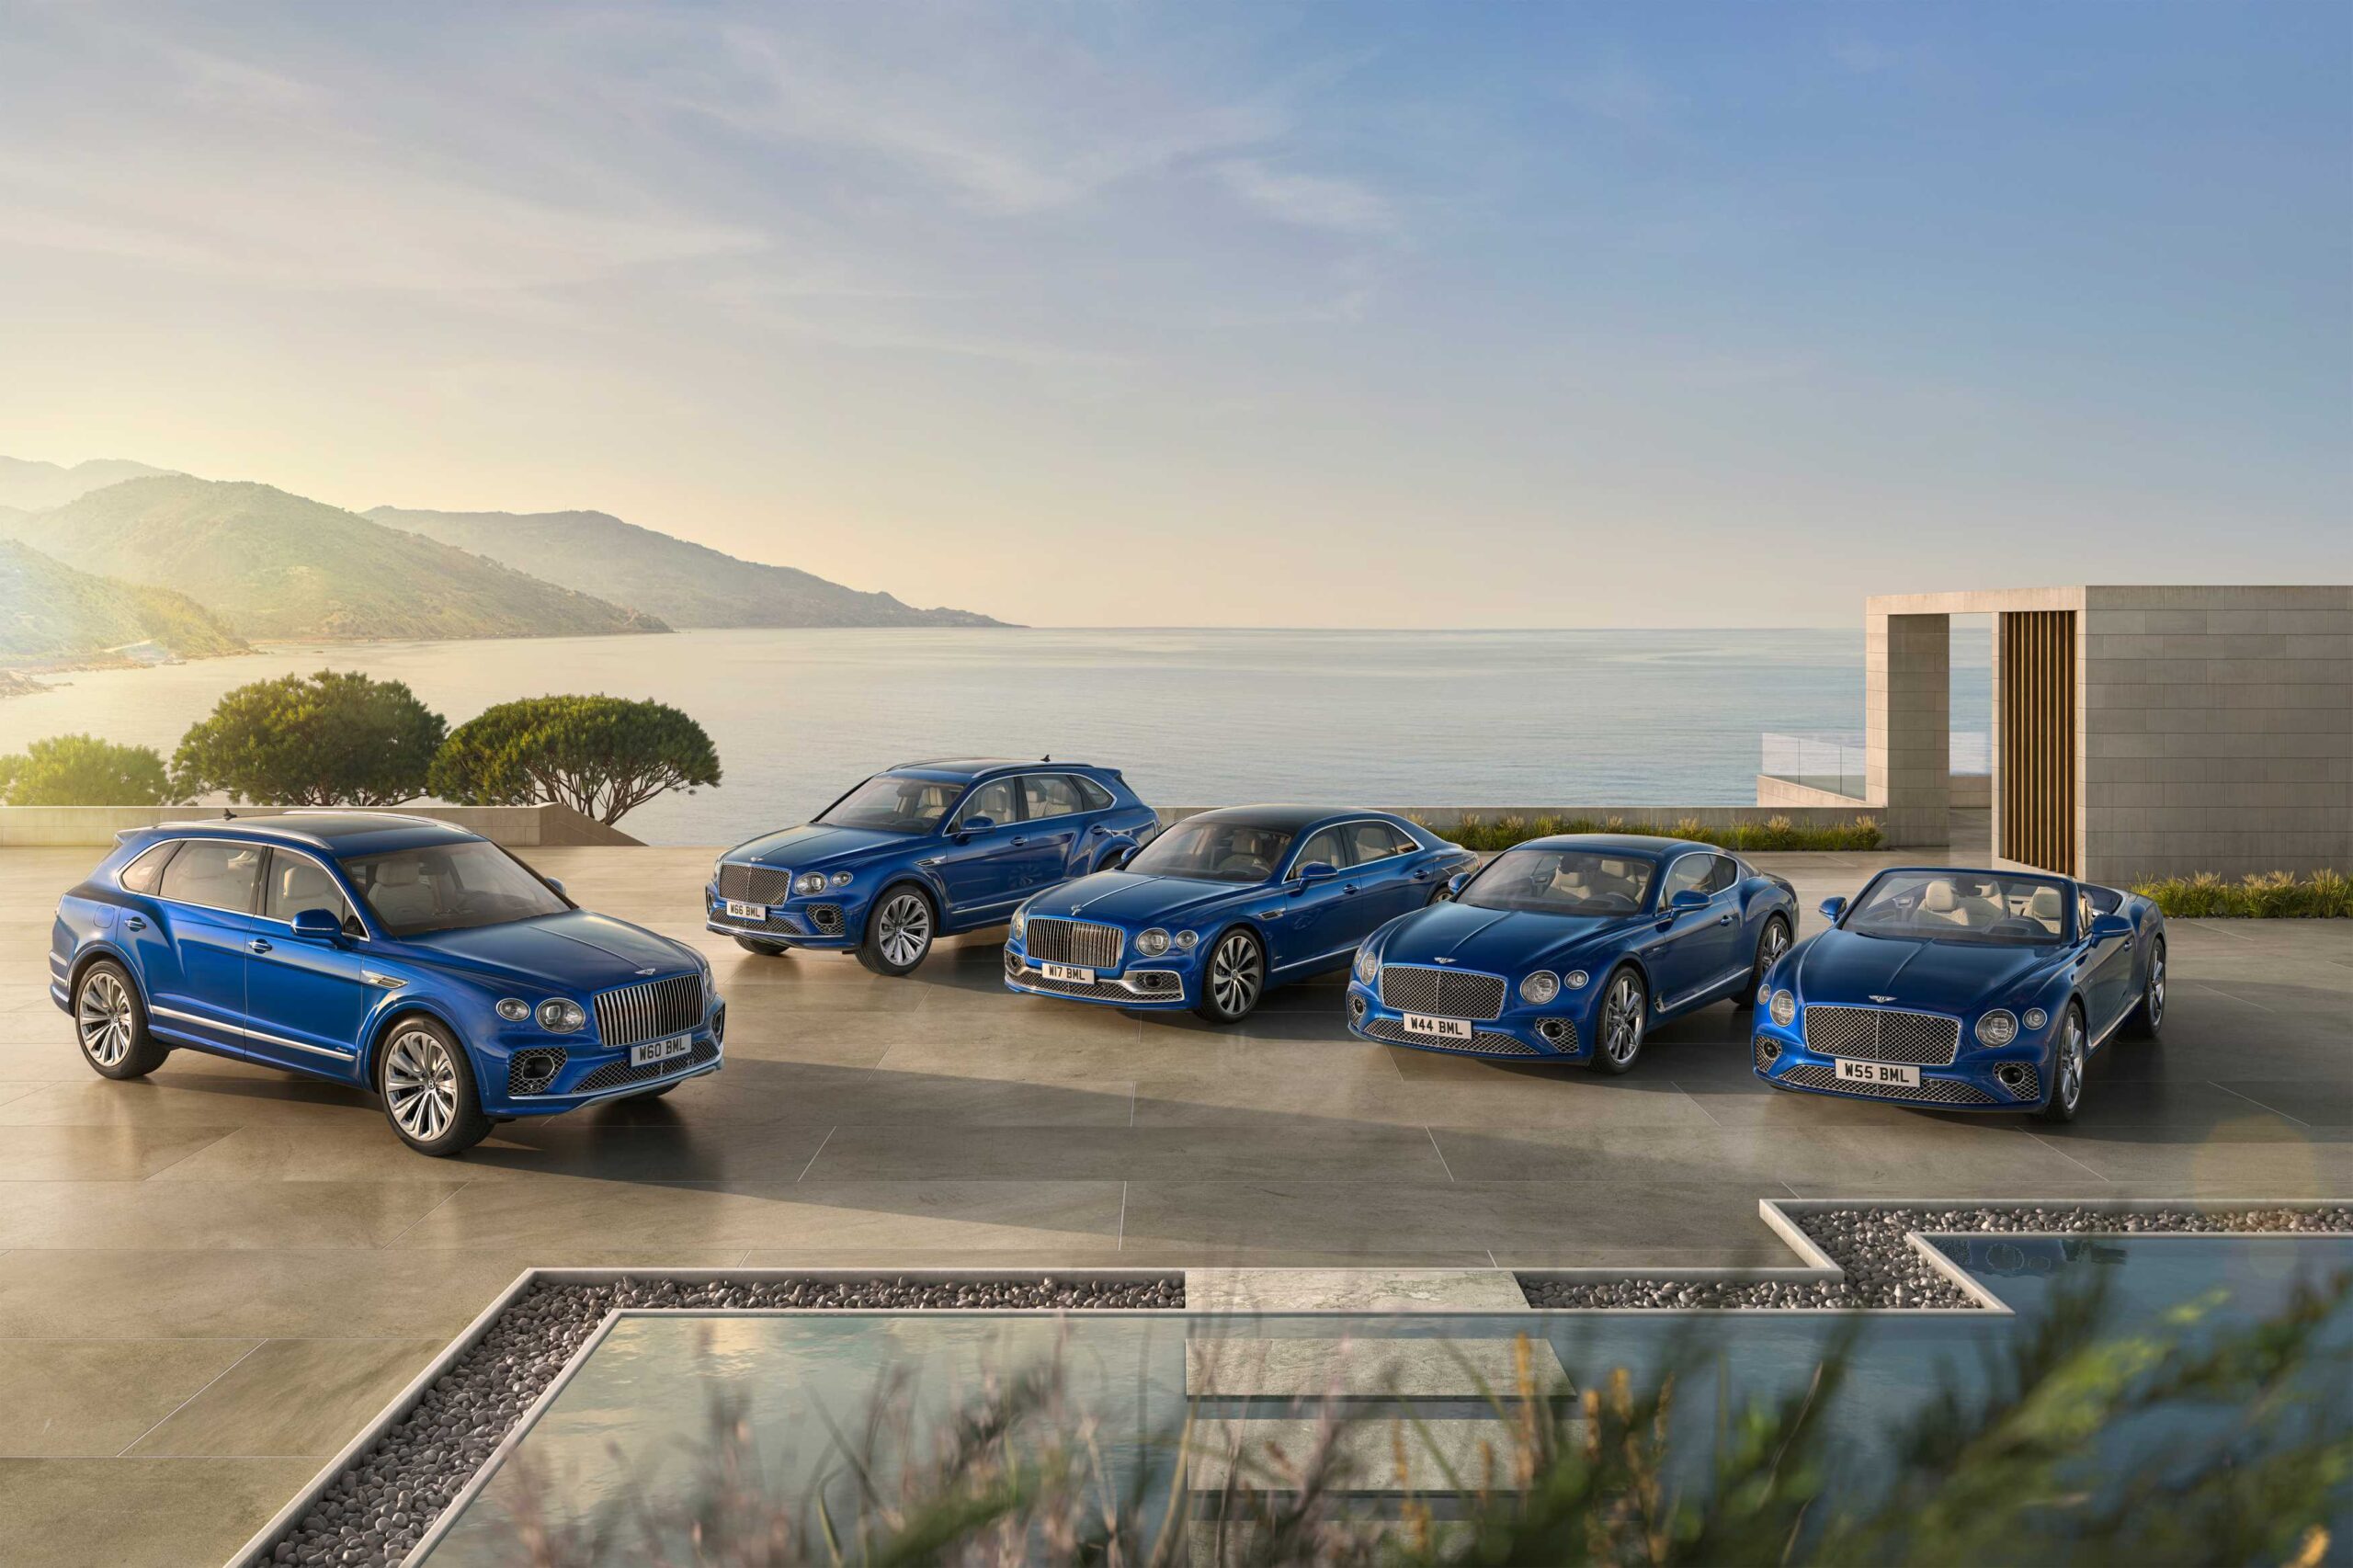 The new Azure range will provide Bentley customers with a curated selection of features designed to enhance the wellbeing